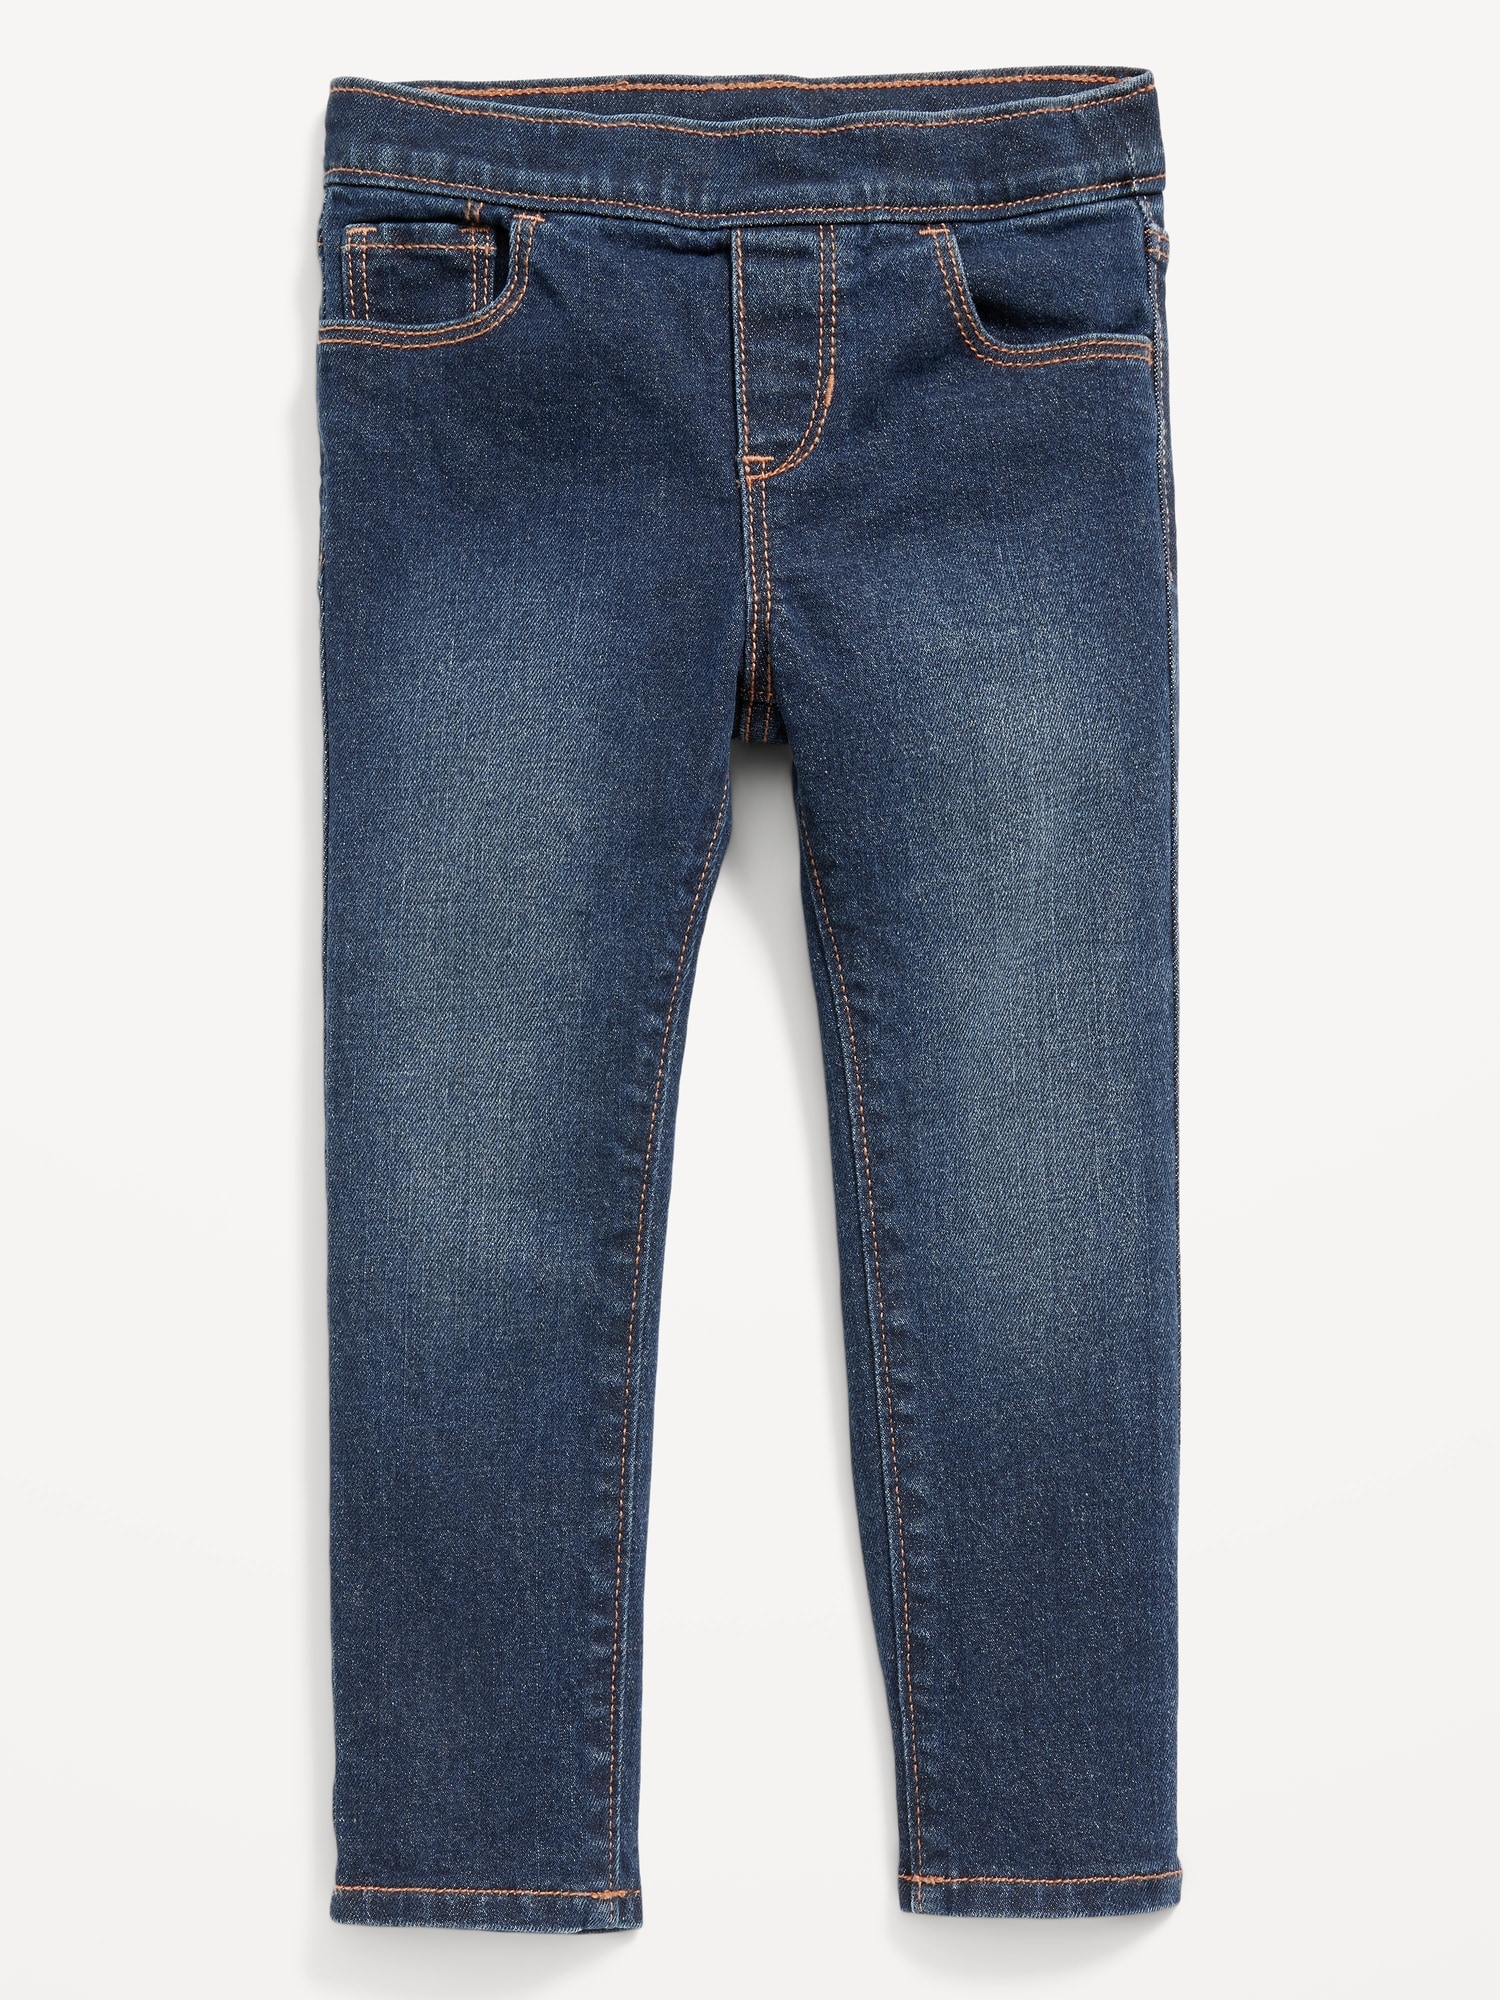 Wow Skinny Pull-On Jeans for Girls